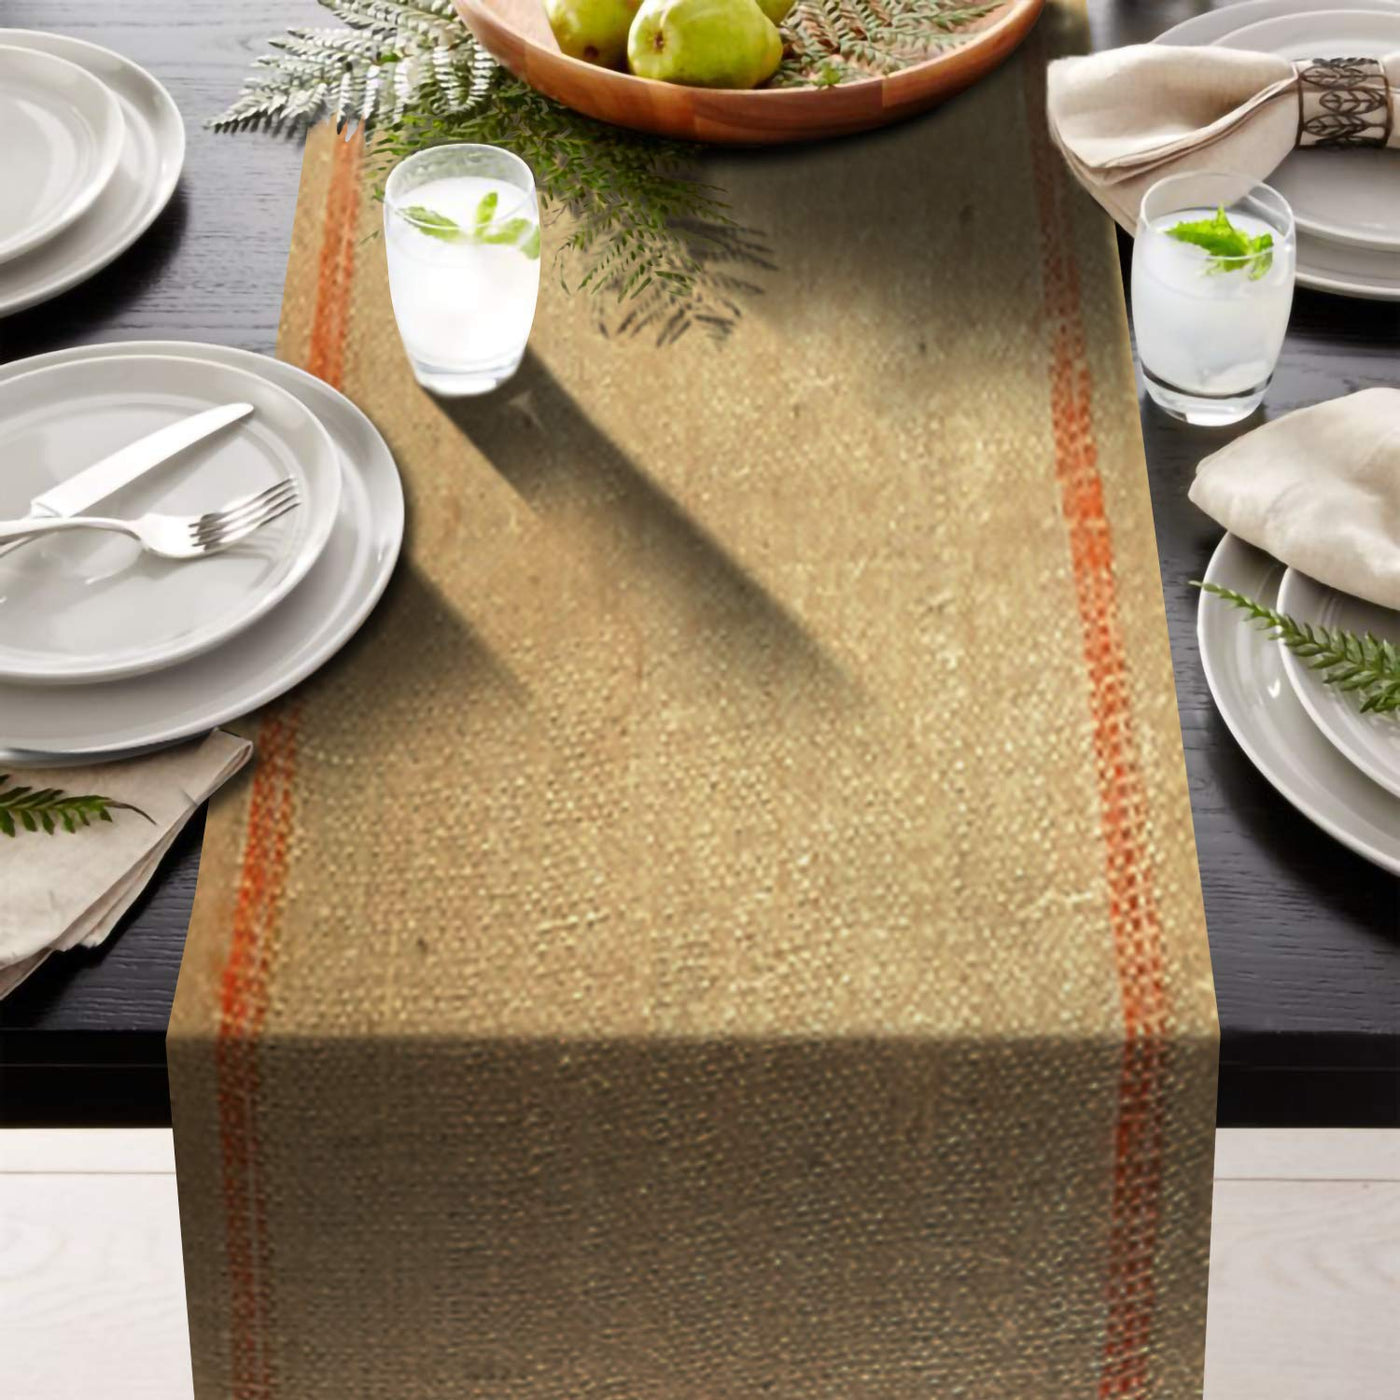 AAYU Burlap Striped Table Runner 12 x 108 Inch No-Fray Food Grade Natural Jute Rustic Table Runner for Home Party Wedding Decorations (Orange)